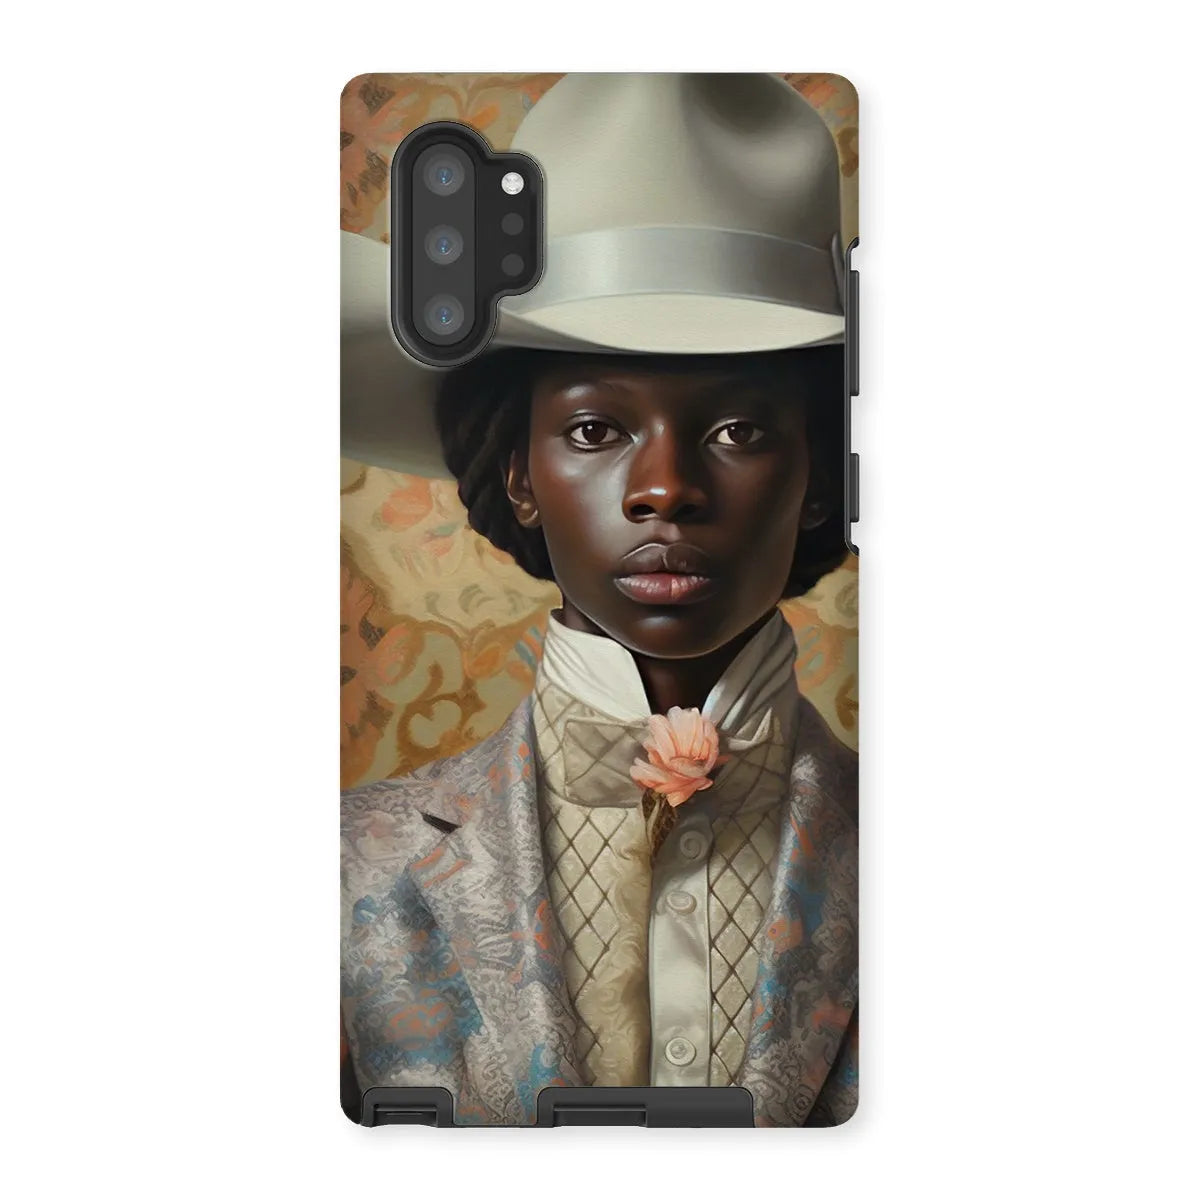 Caesar The Gay Cowboy - Gay Aesthetic Art Phone Case - Samsung Galaxy Note 10p / Matte - Mobile Phone Cases - Aesthetic